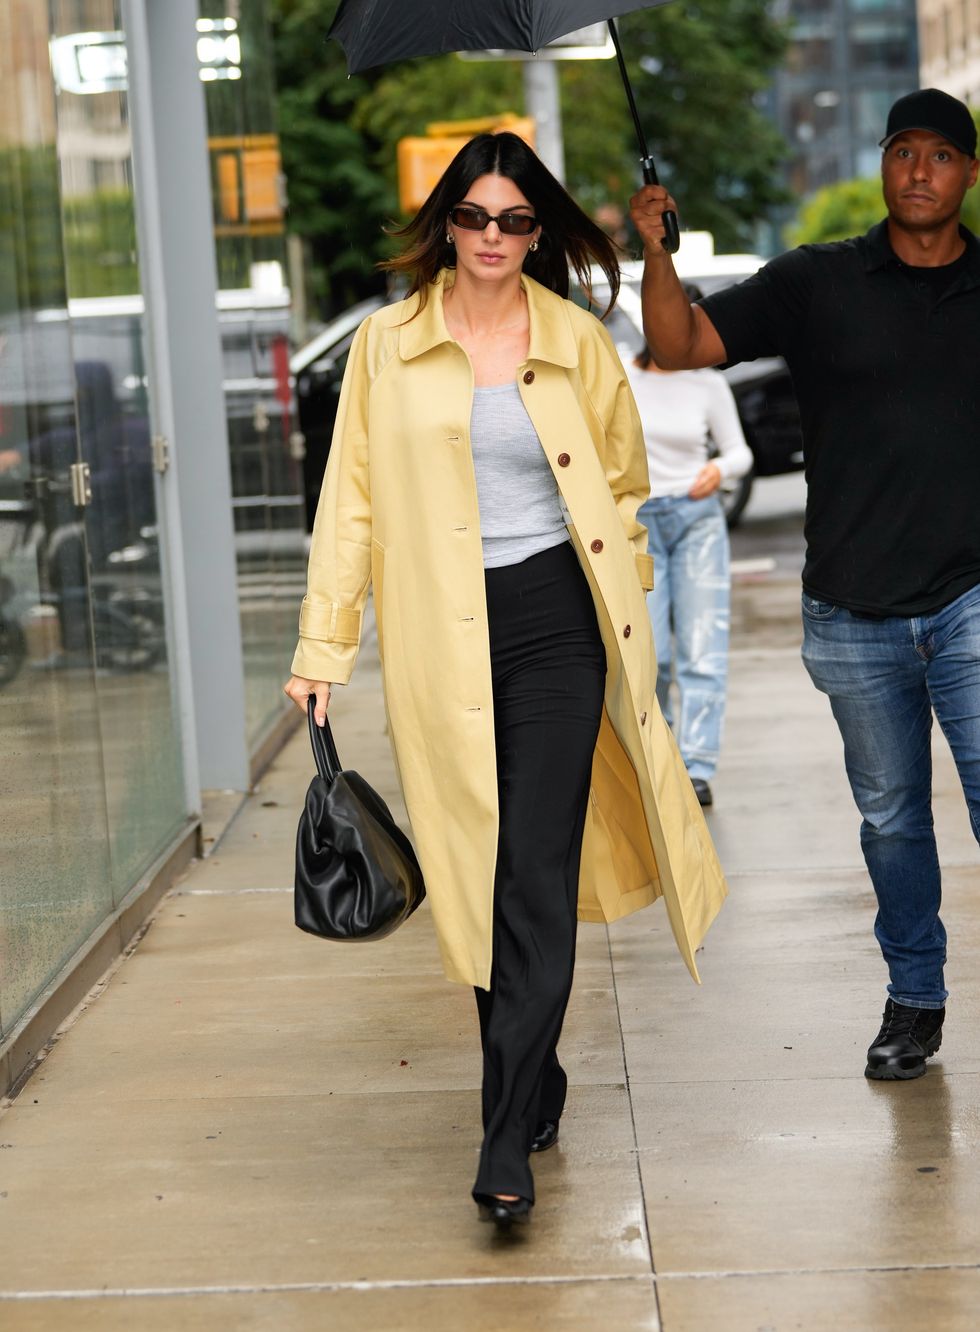 Kendall Jenner's Street Style and Closet Staples